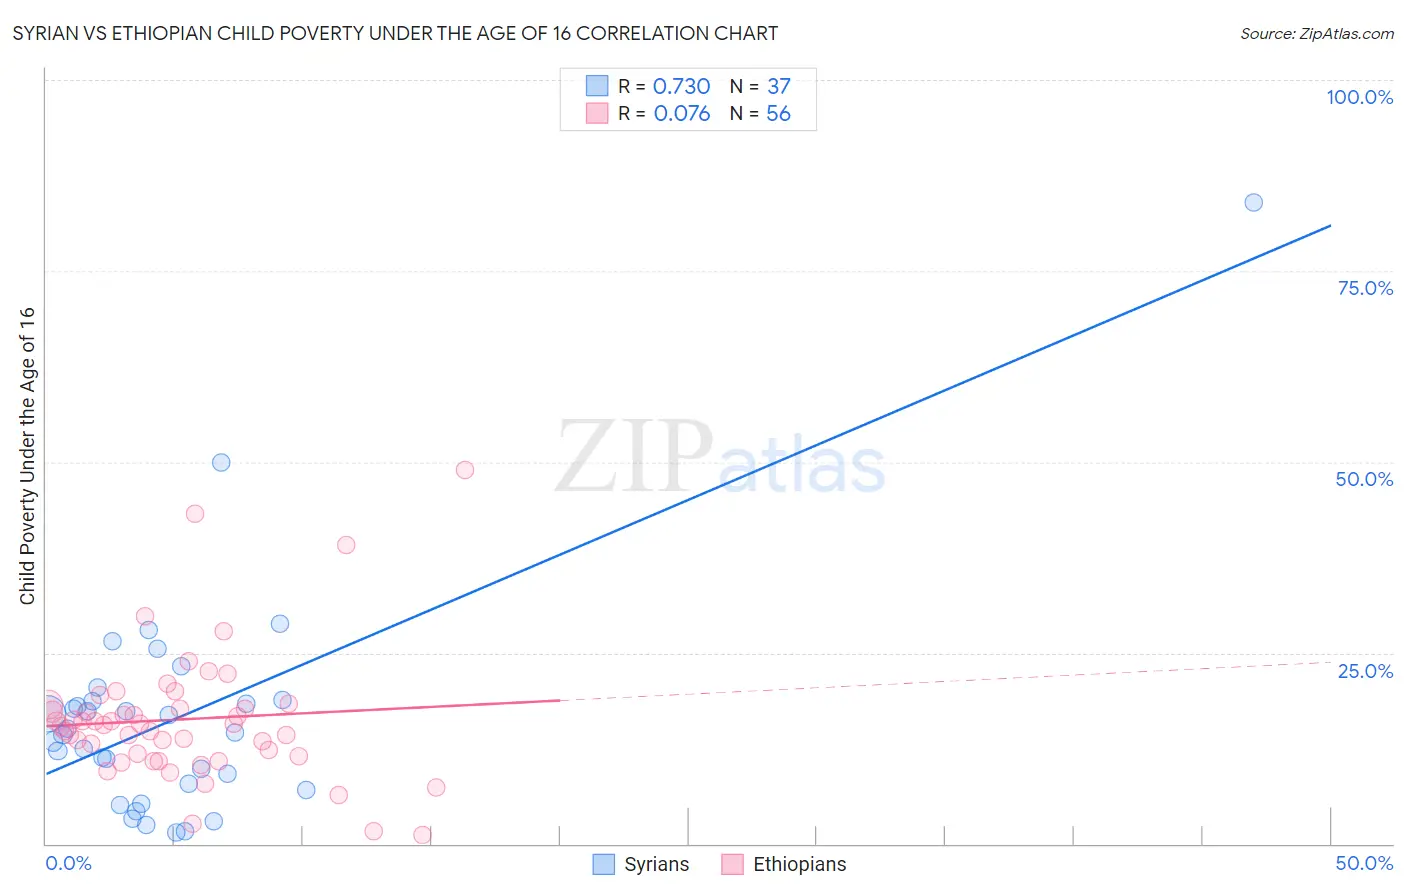 Syrian vs Ethiopian Child Poverty Under the Age of 16